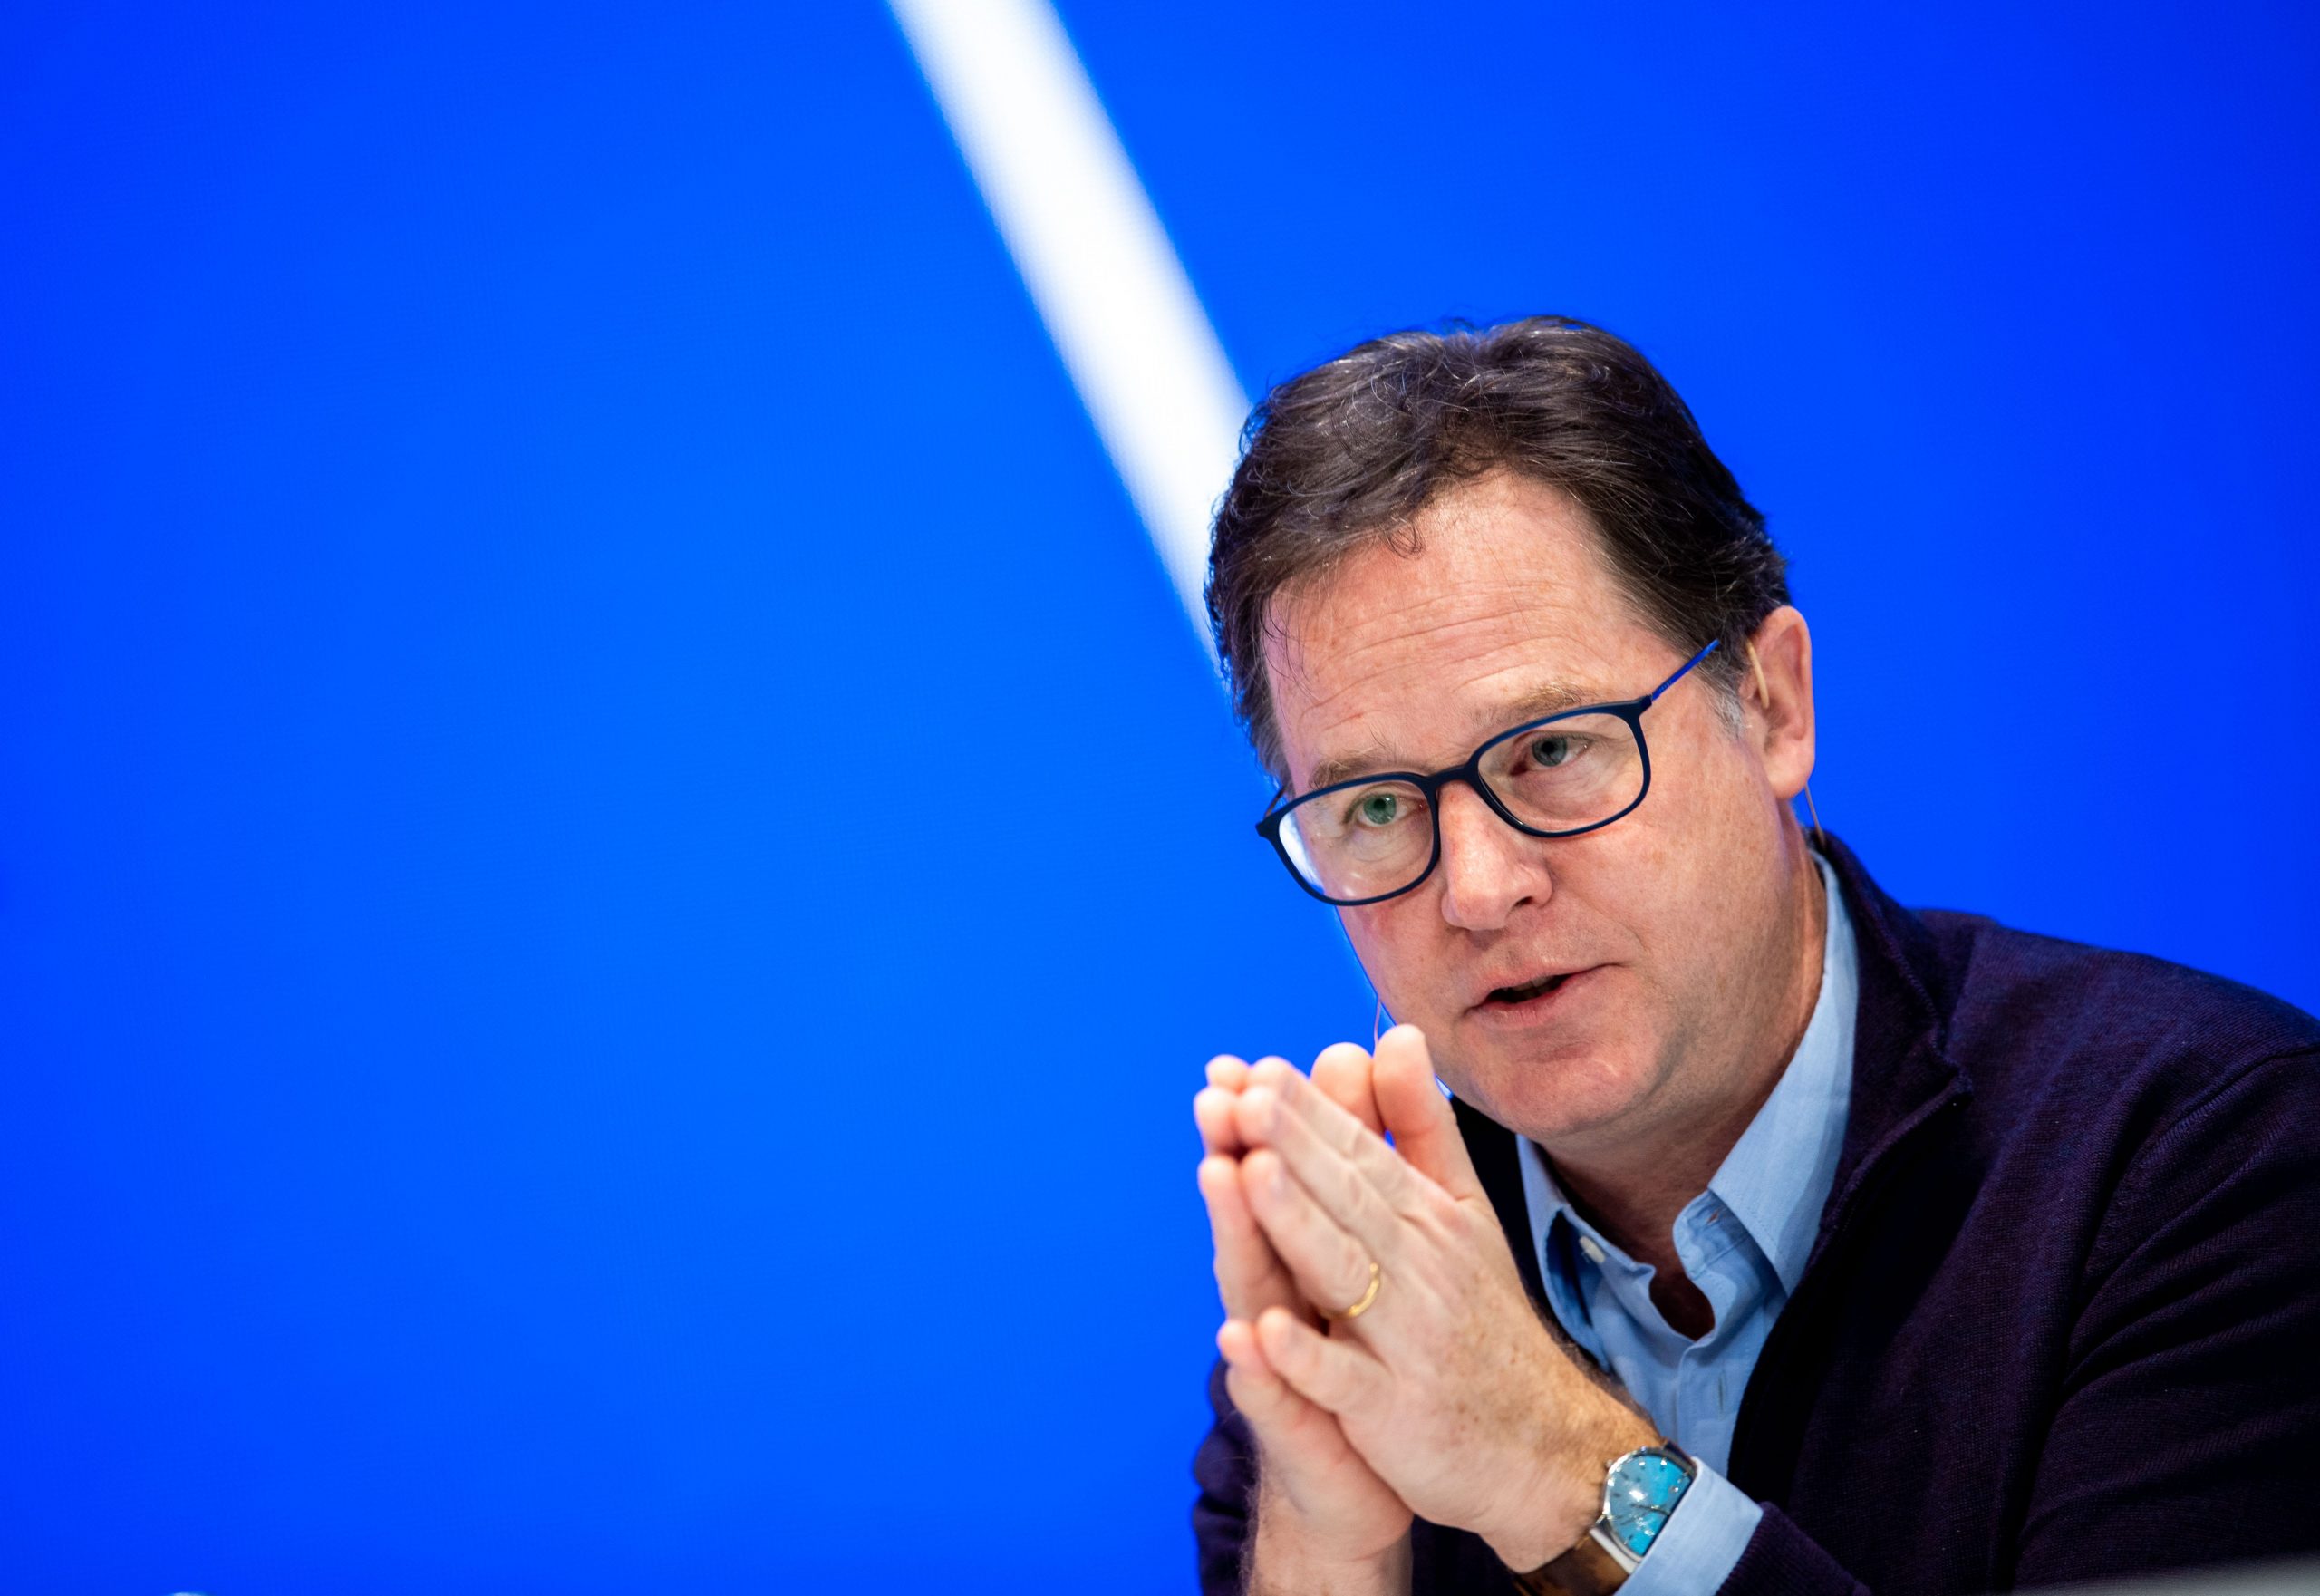 20 January 2020, Bavaria, Munich: Nick Clegg, Head of Policy at Facebook, speaks on stage during the DLD (Digital Life Design) innovation conference. Clegg has defended the decision to stick to advertising with political content, unlike Twitter and Google.